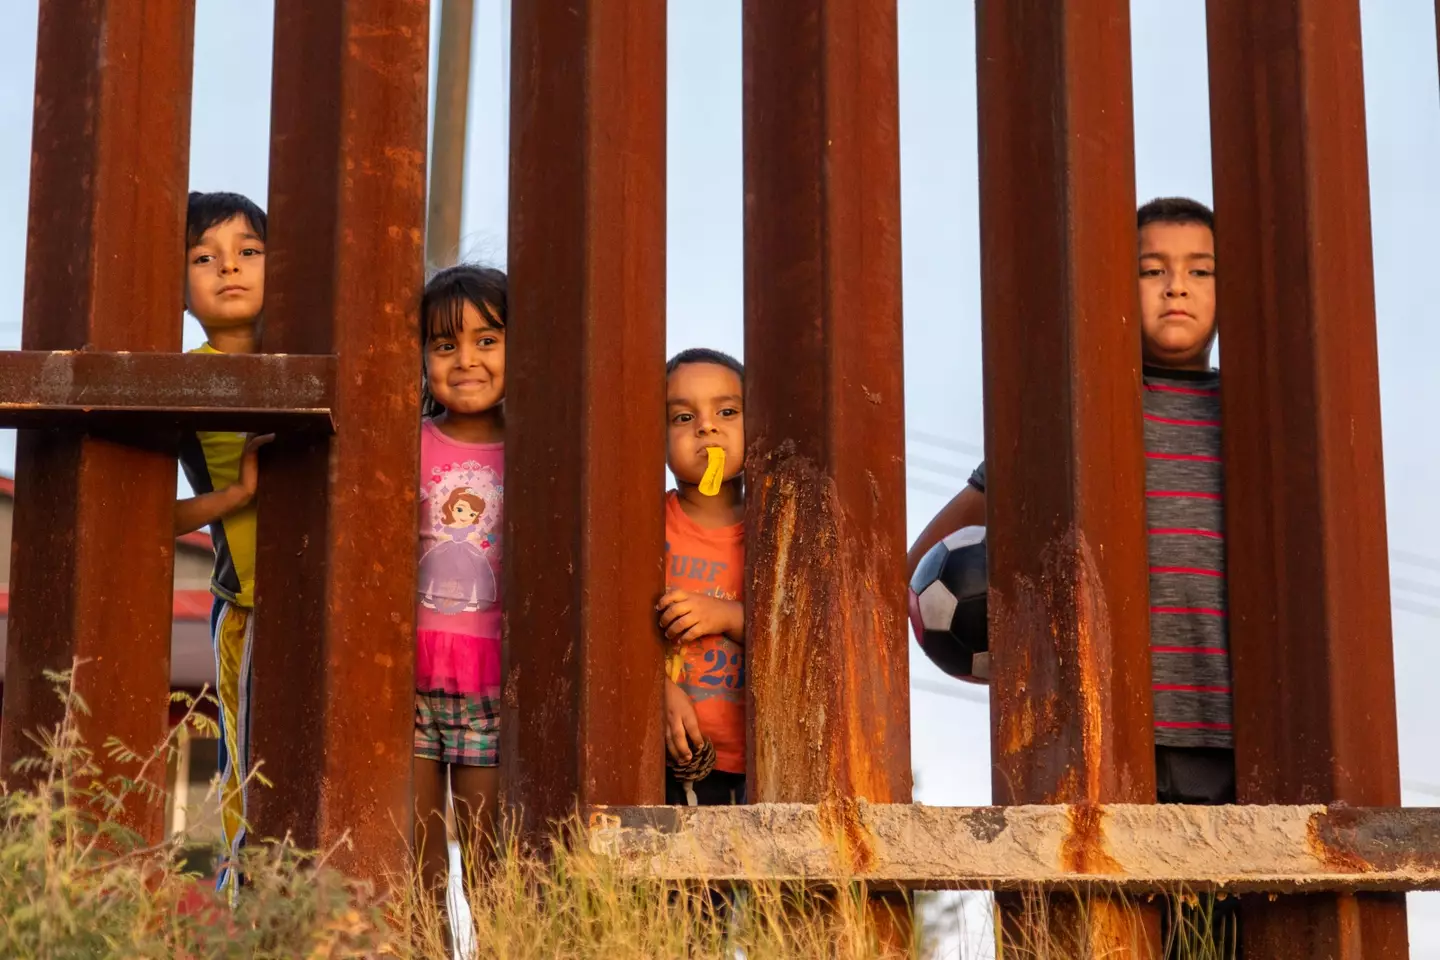 Children playing at the Mexico-US border wall, built by the Trump administration.